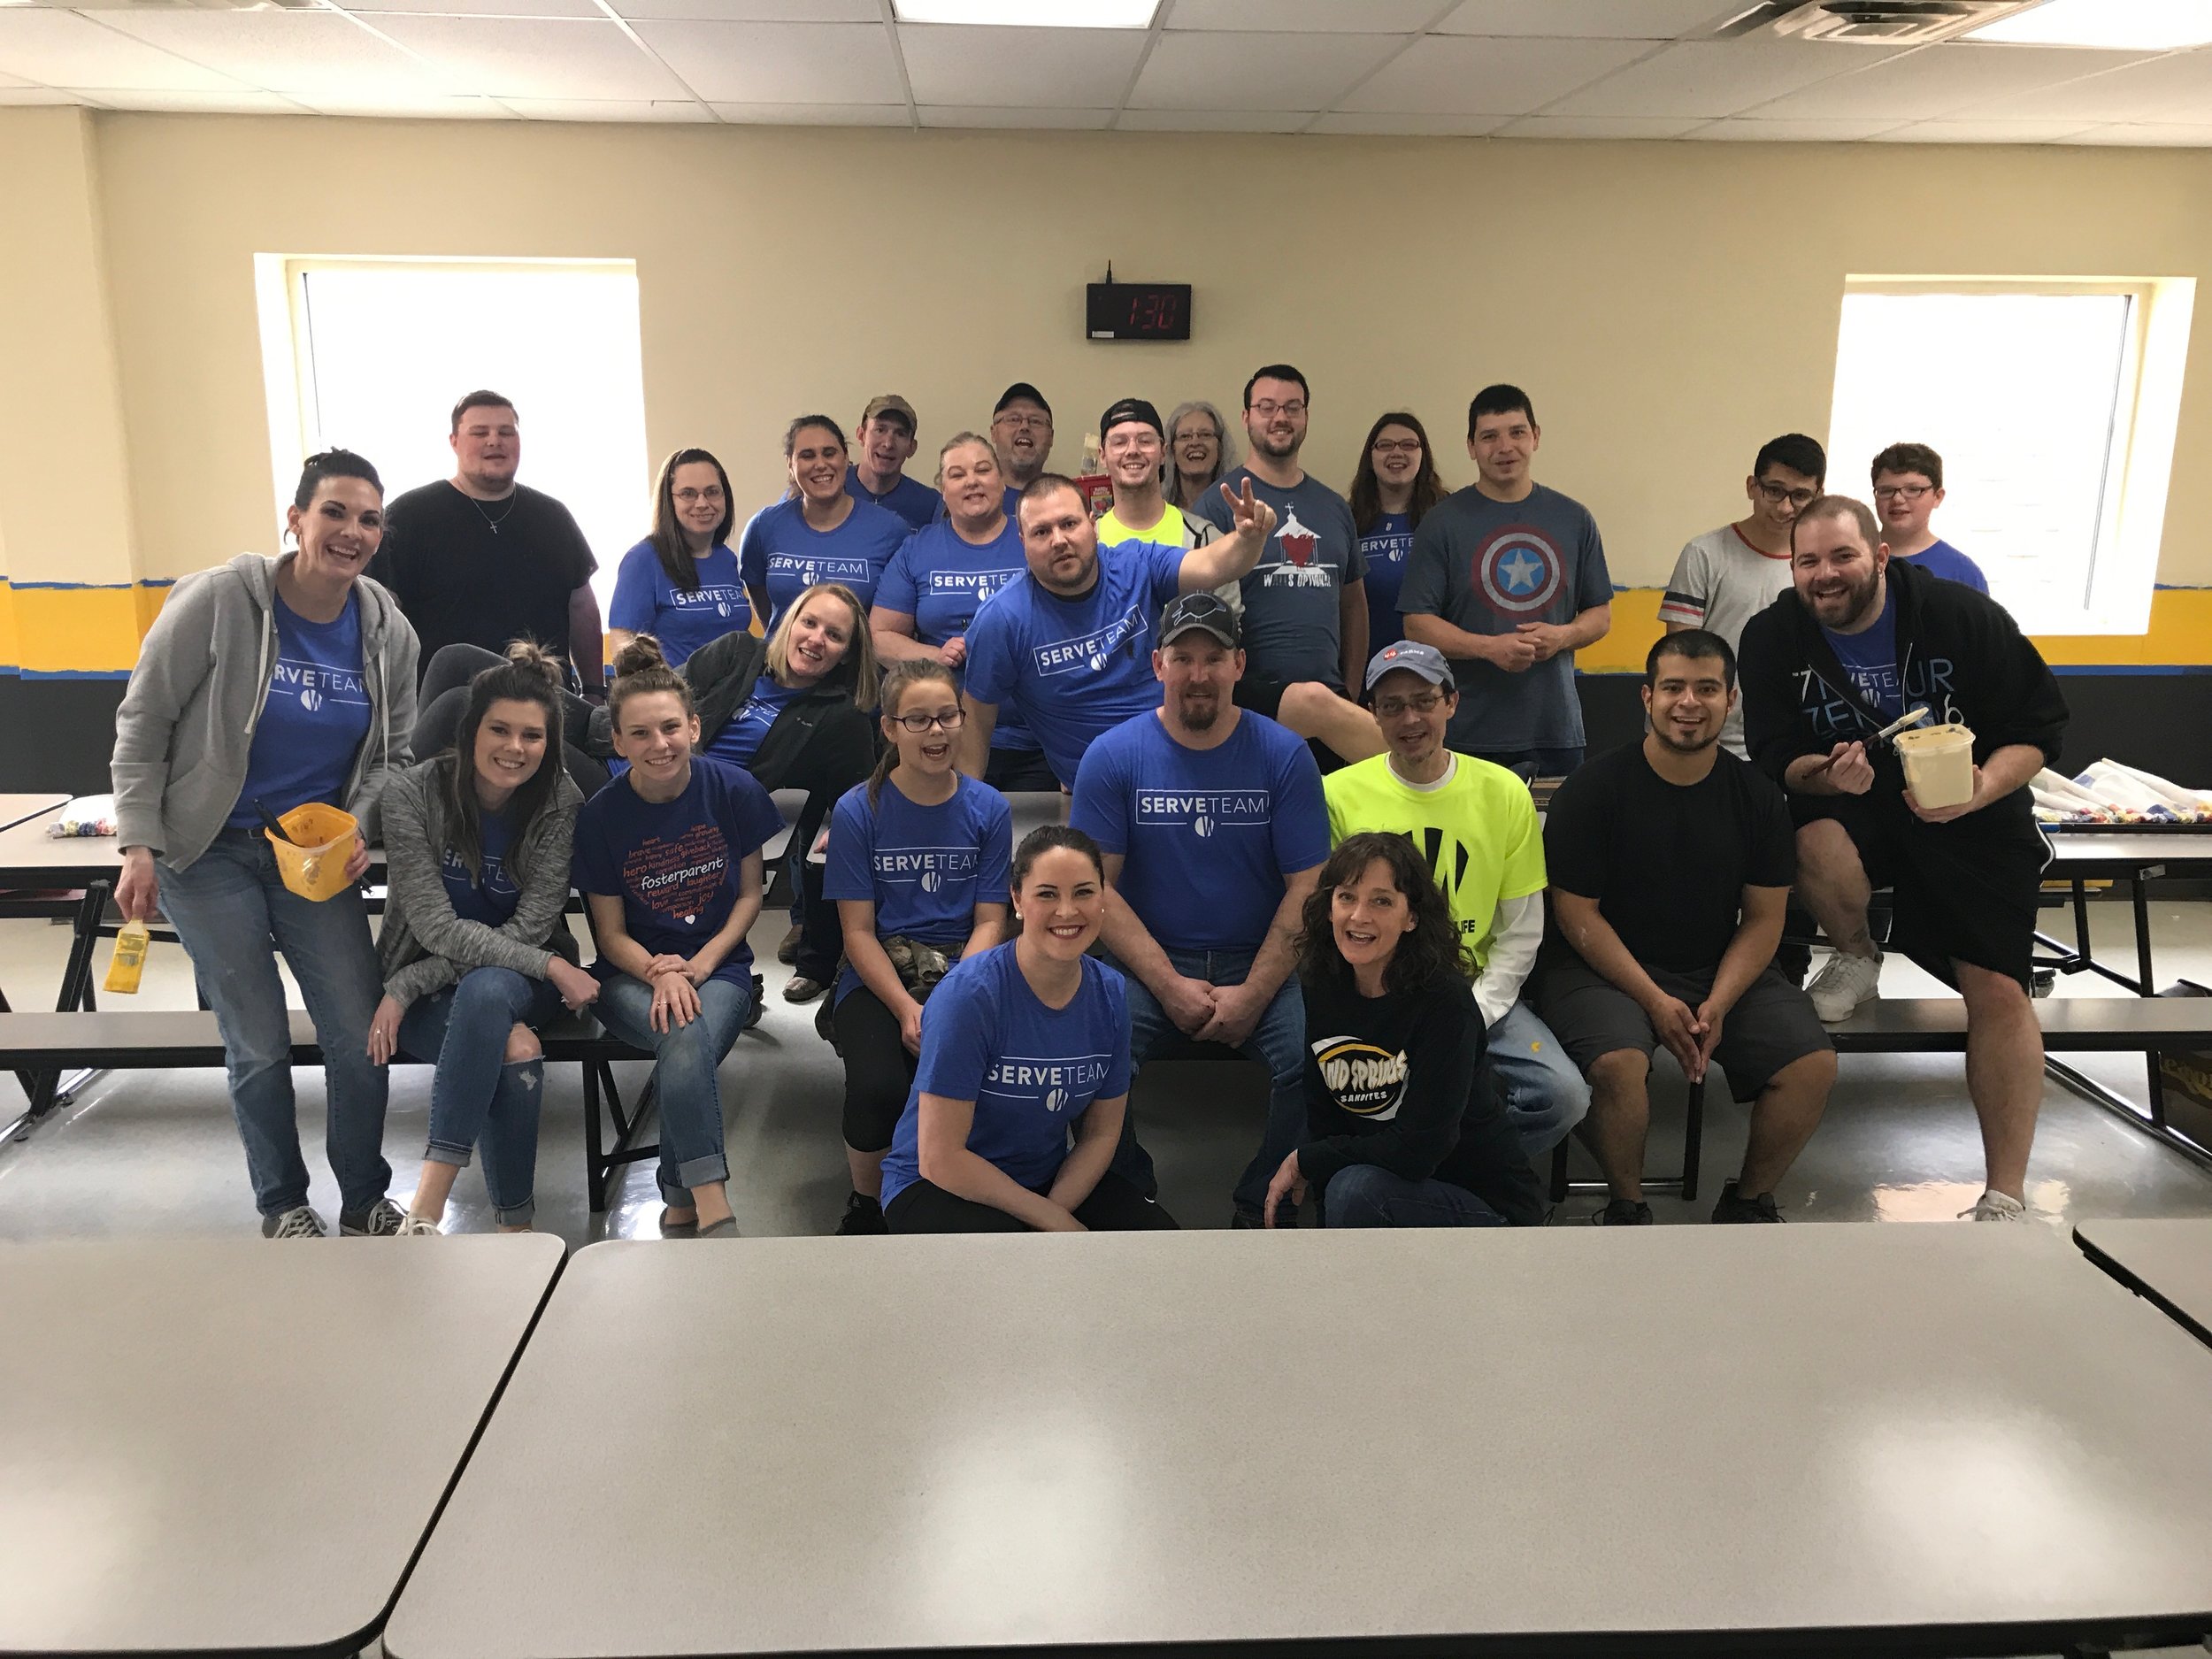  Forty Word of Life volunteers spent several hours painting the Limestone Technology Academy cafeteria Sunday after church. (Photo: Micah Felts). 